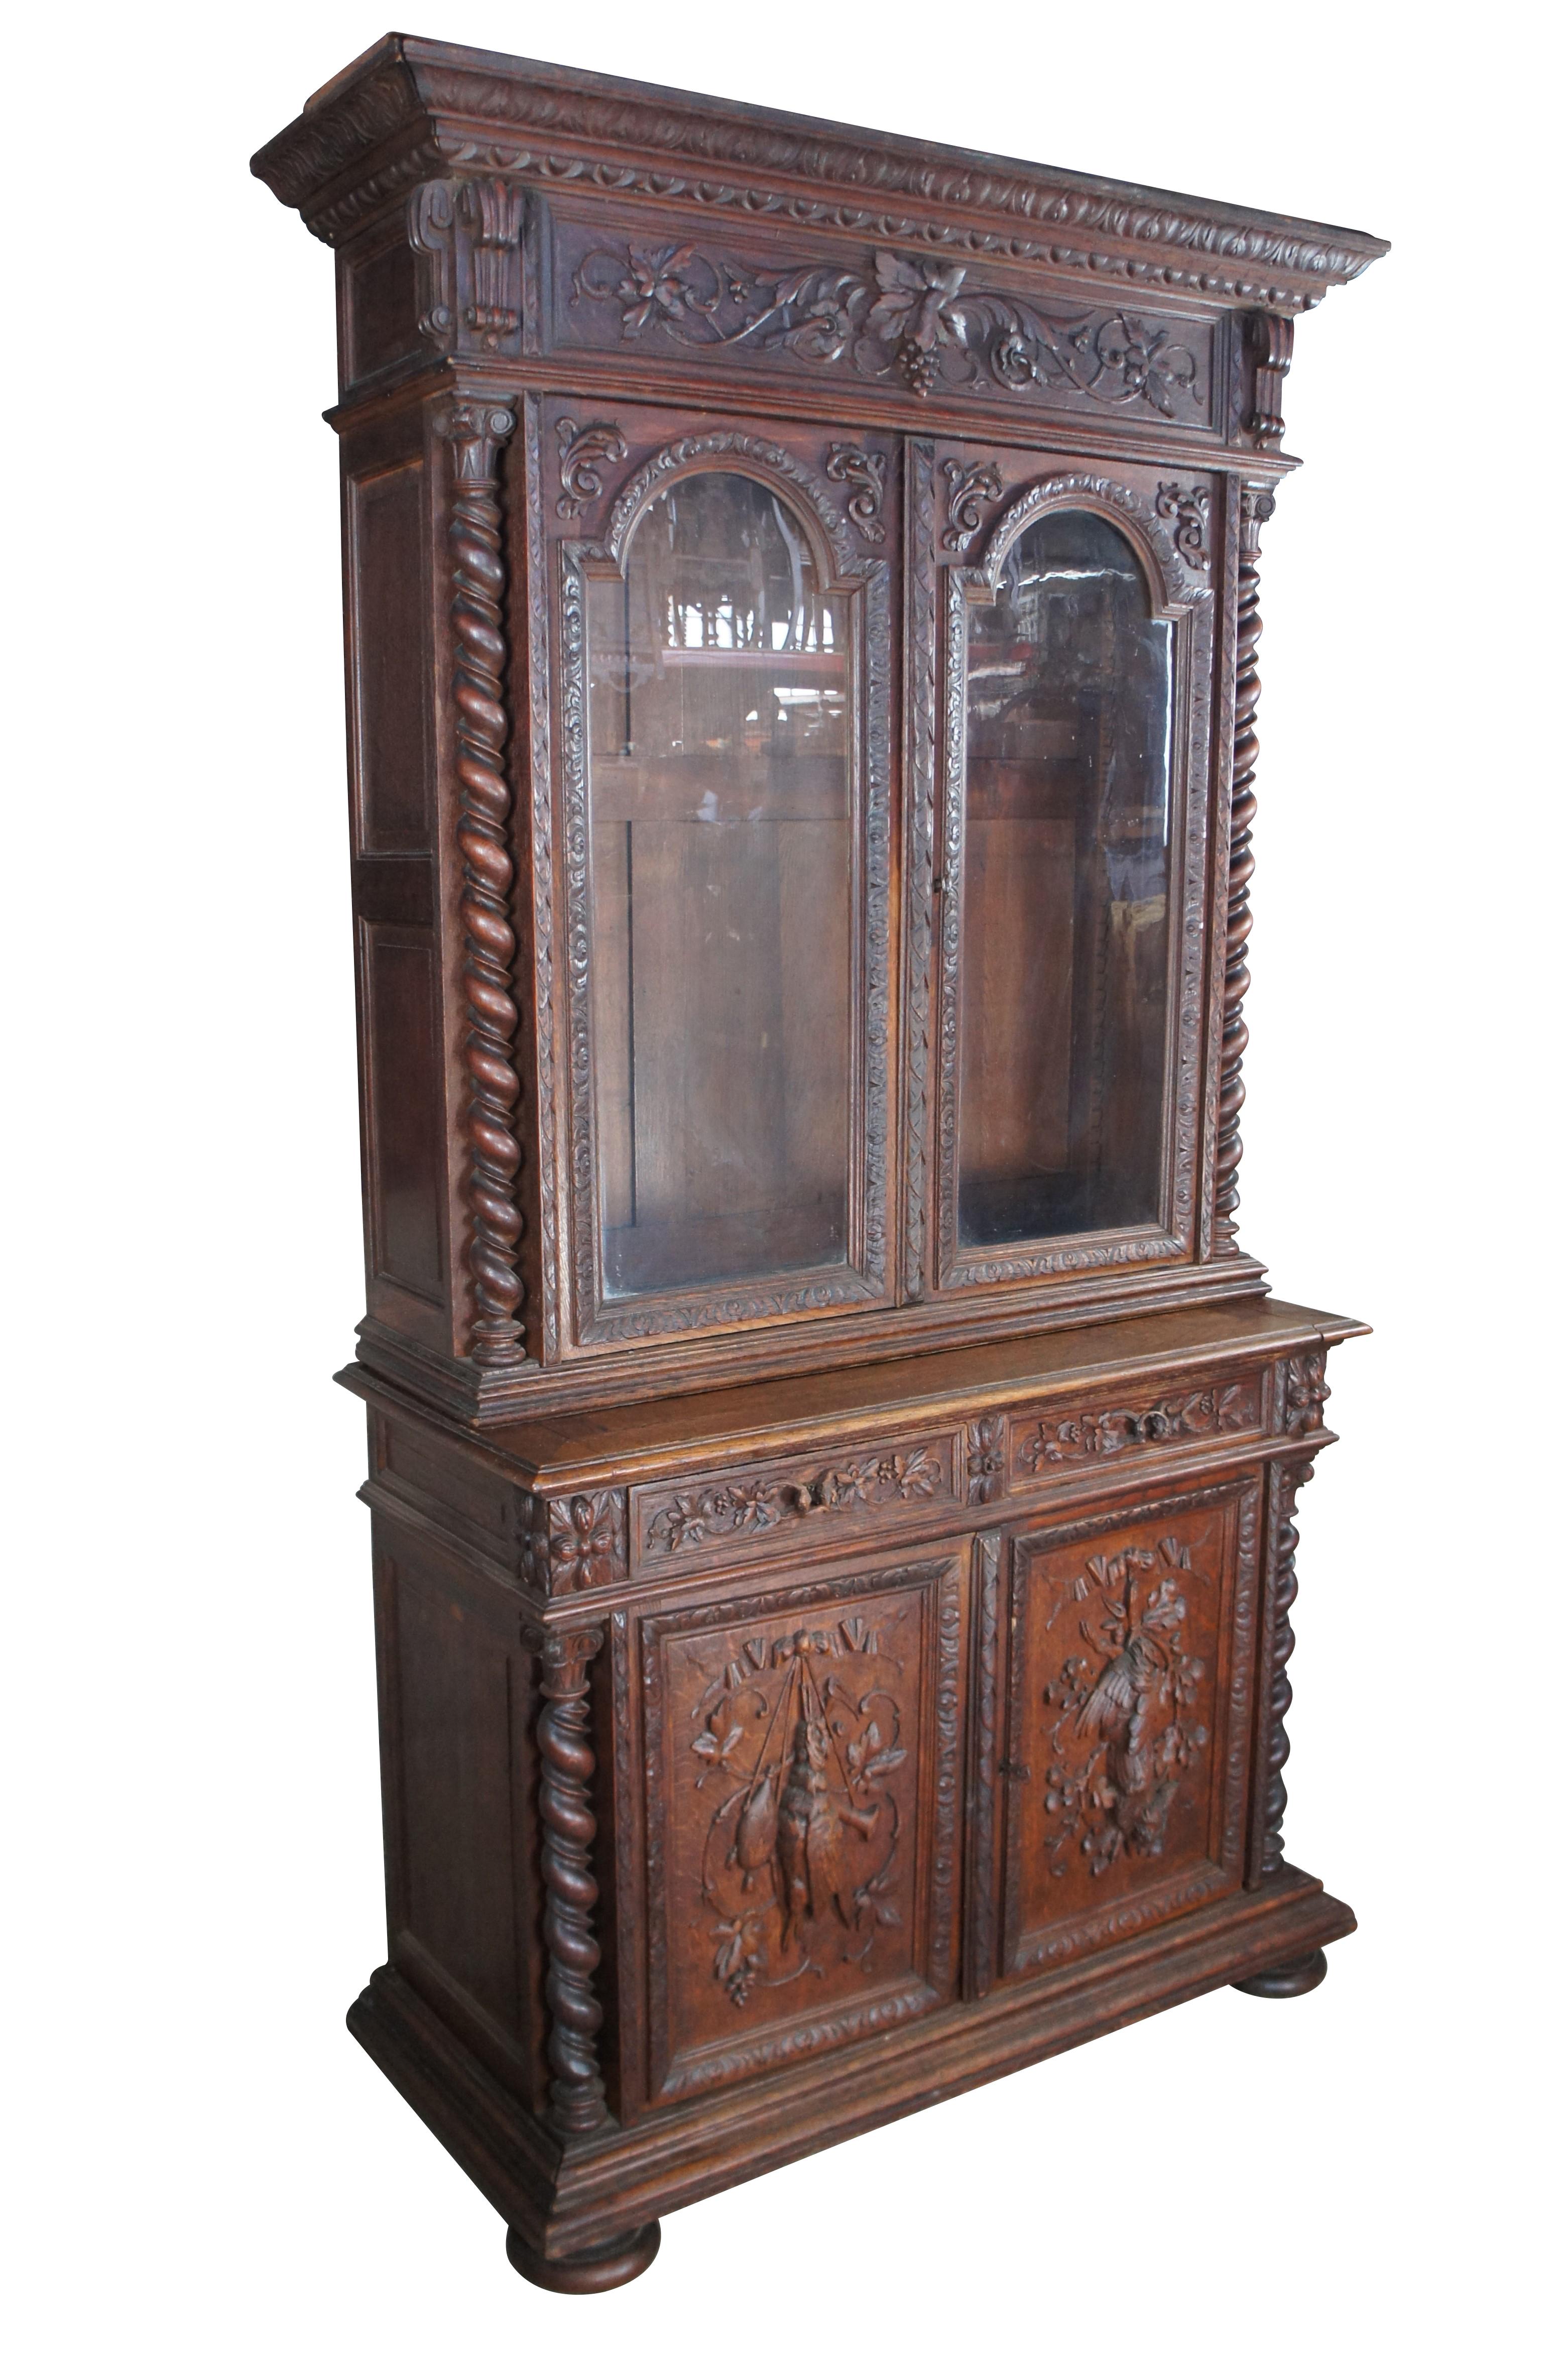 Exceptional Antique 19th Century French Henry II / Renaissance Revival Hunt Cabinet. Hand carved from oak with a large upper display portion flanked by barley twisted columns. Opens to two shelves. The lower storage area of the cabinet features